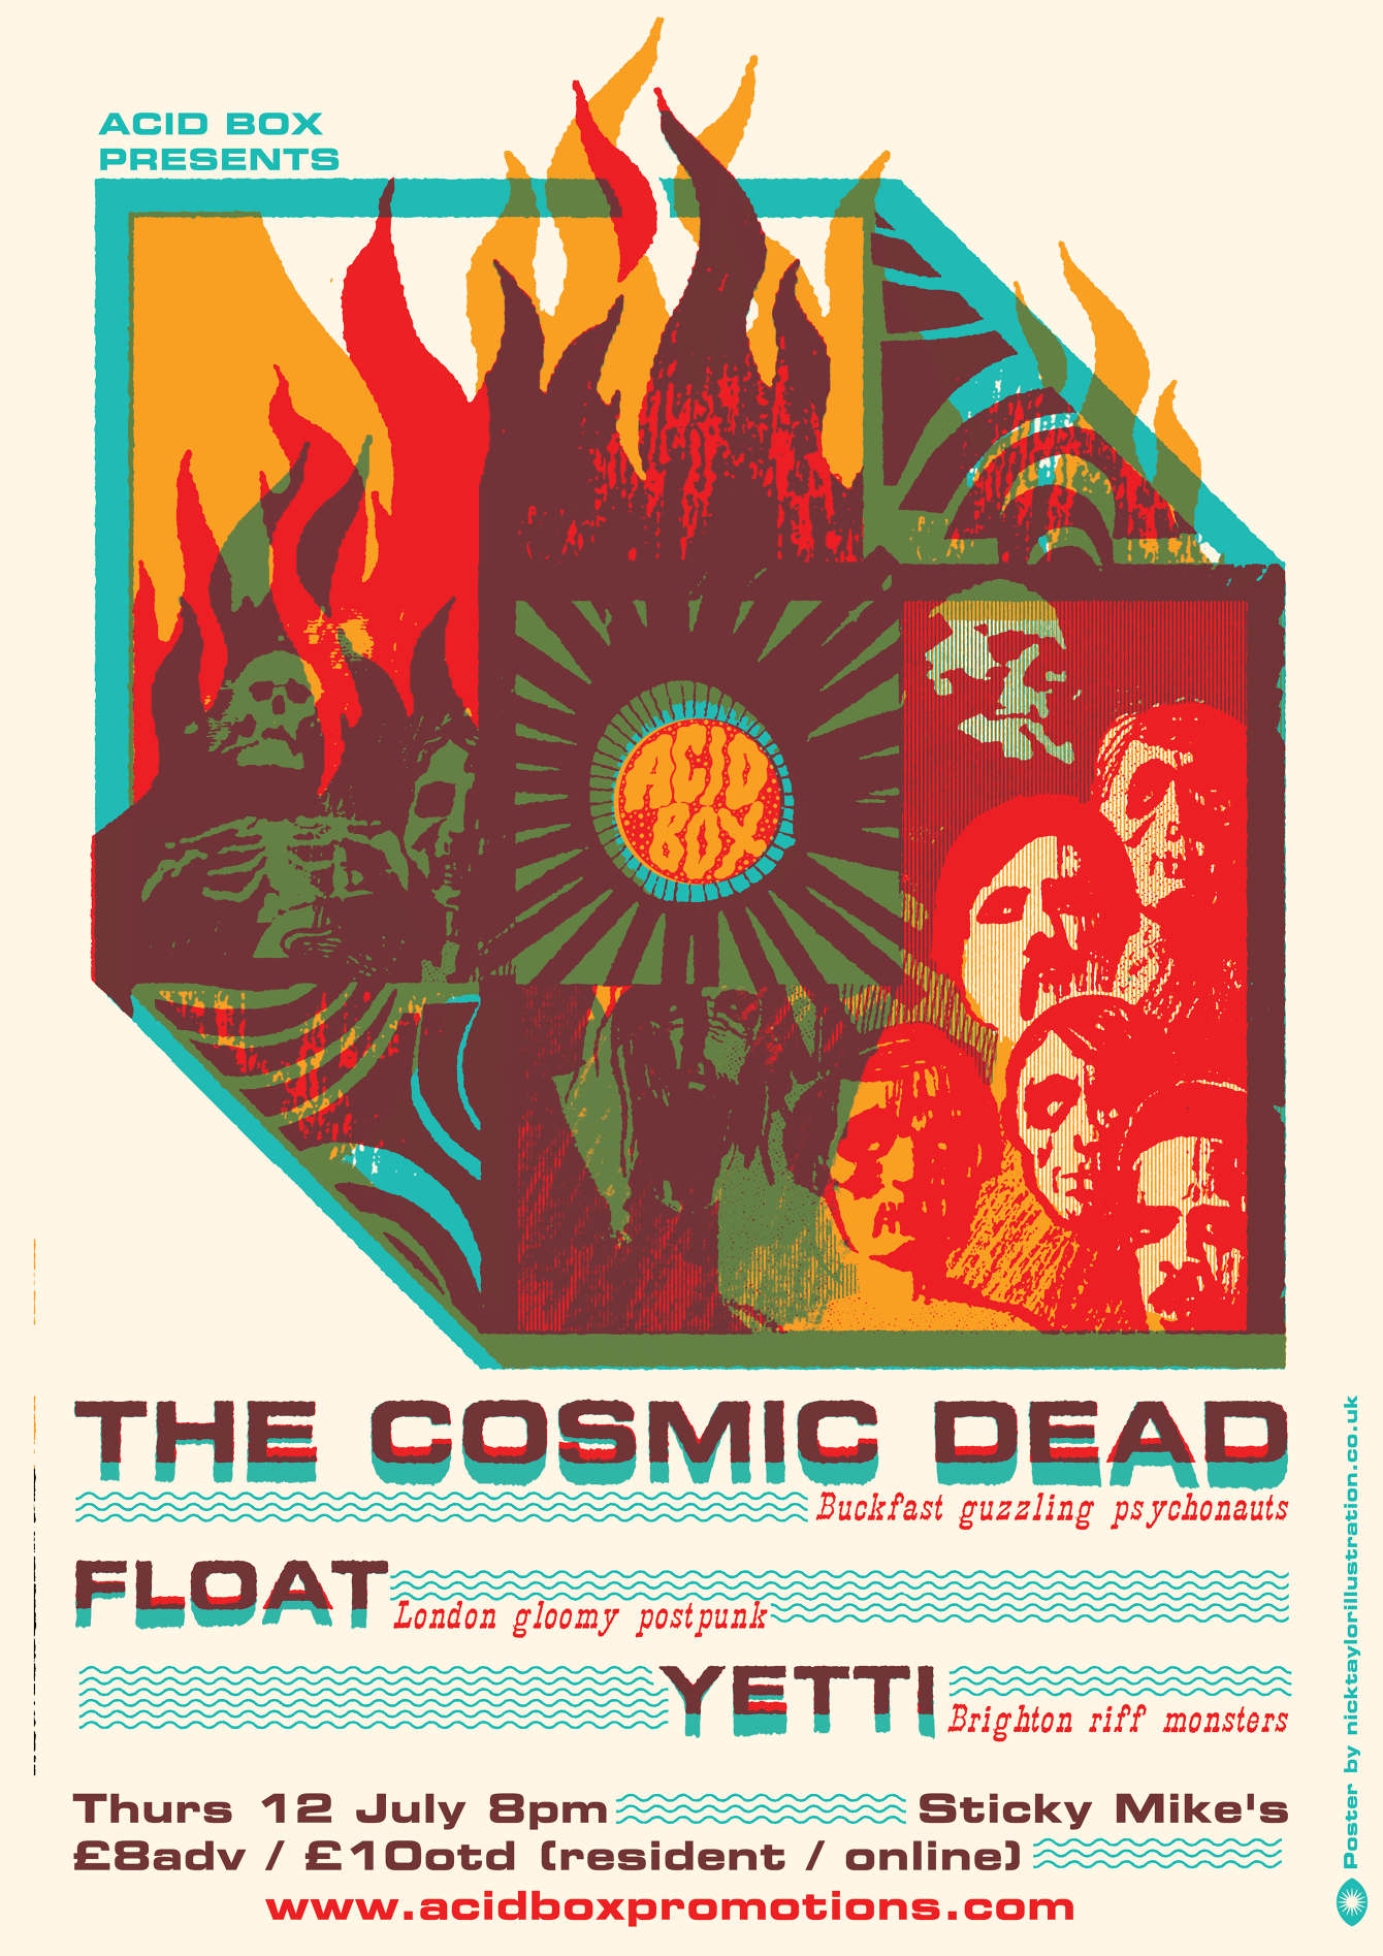 Artwork for New Candys, The Cosmic Dead, The Oscillation by NickTaylorIllustration